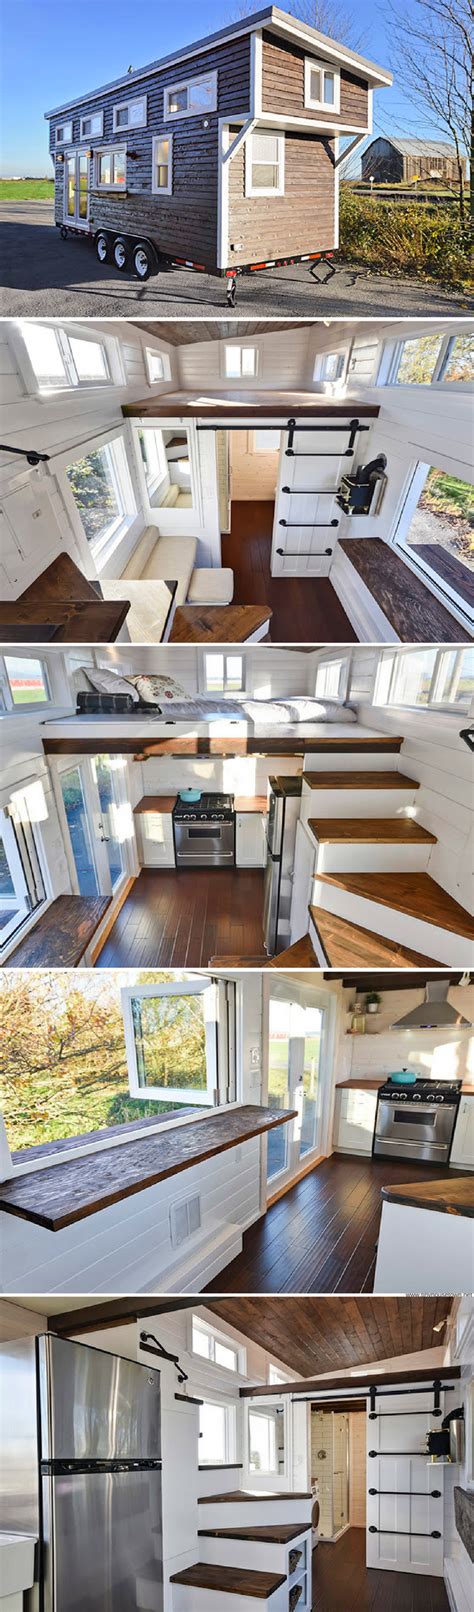 A Custom Tiny Home From Canadian Builder Mint Tiny House Company Best